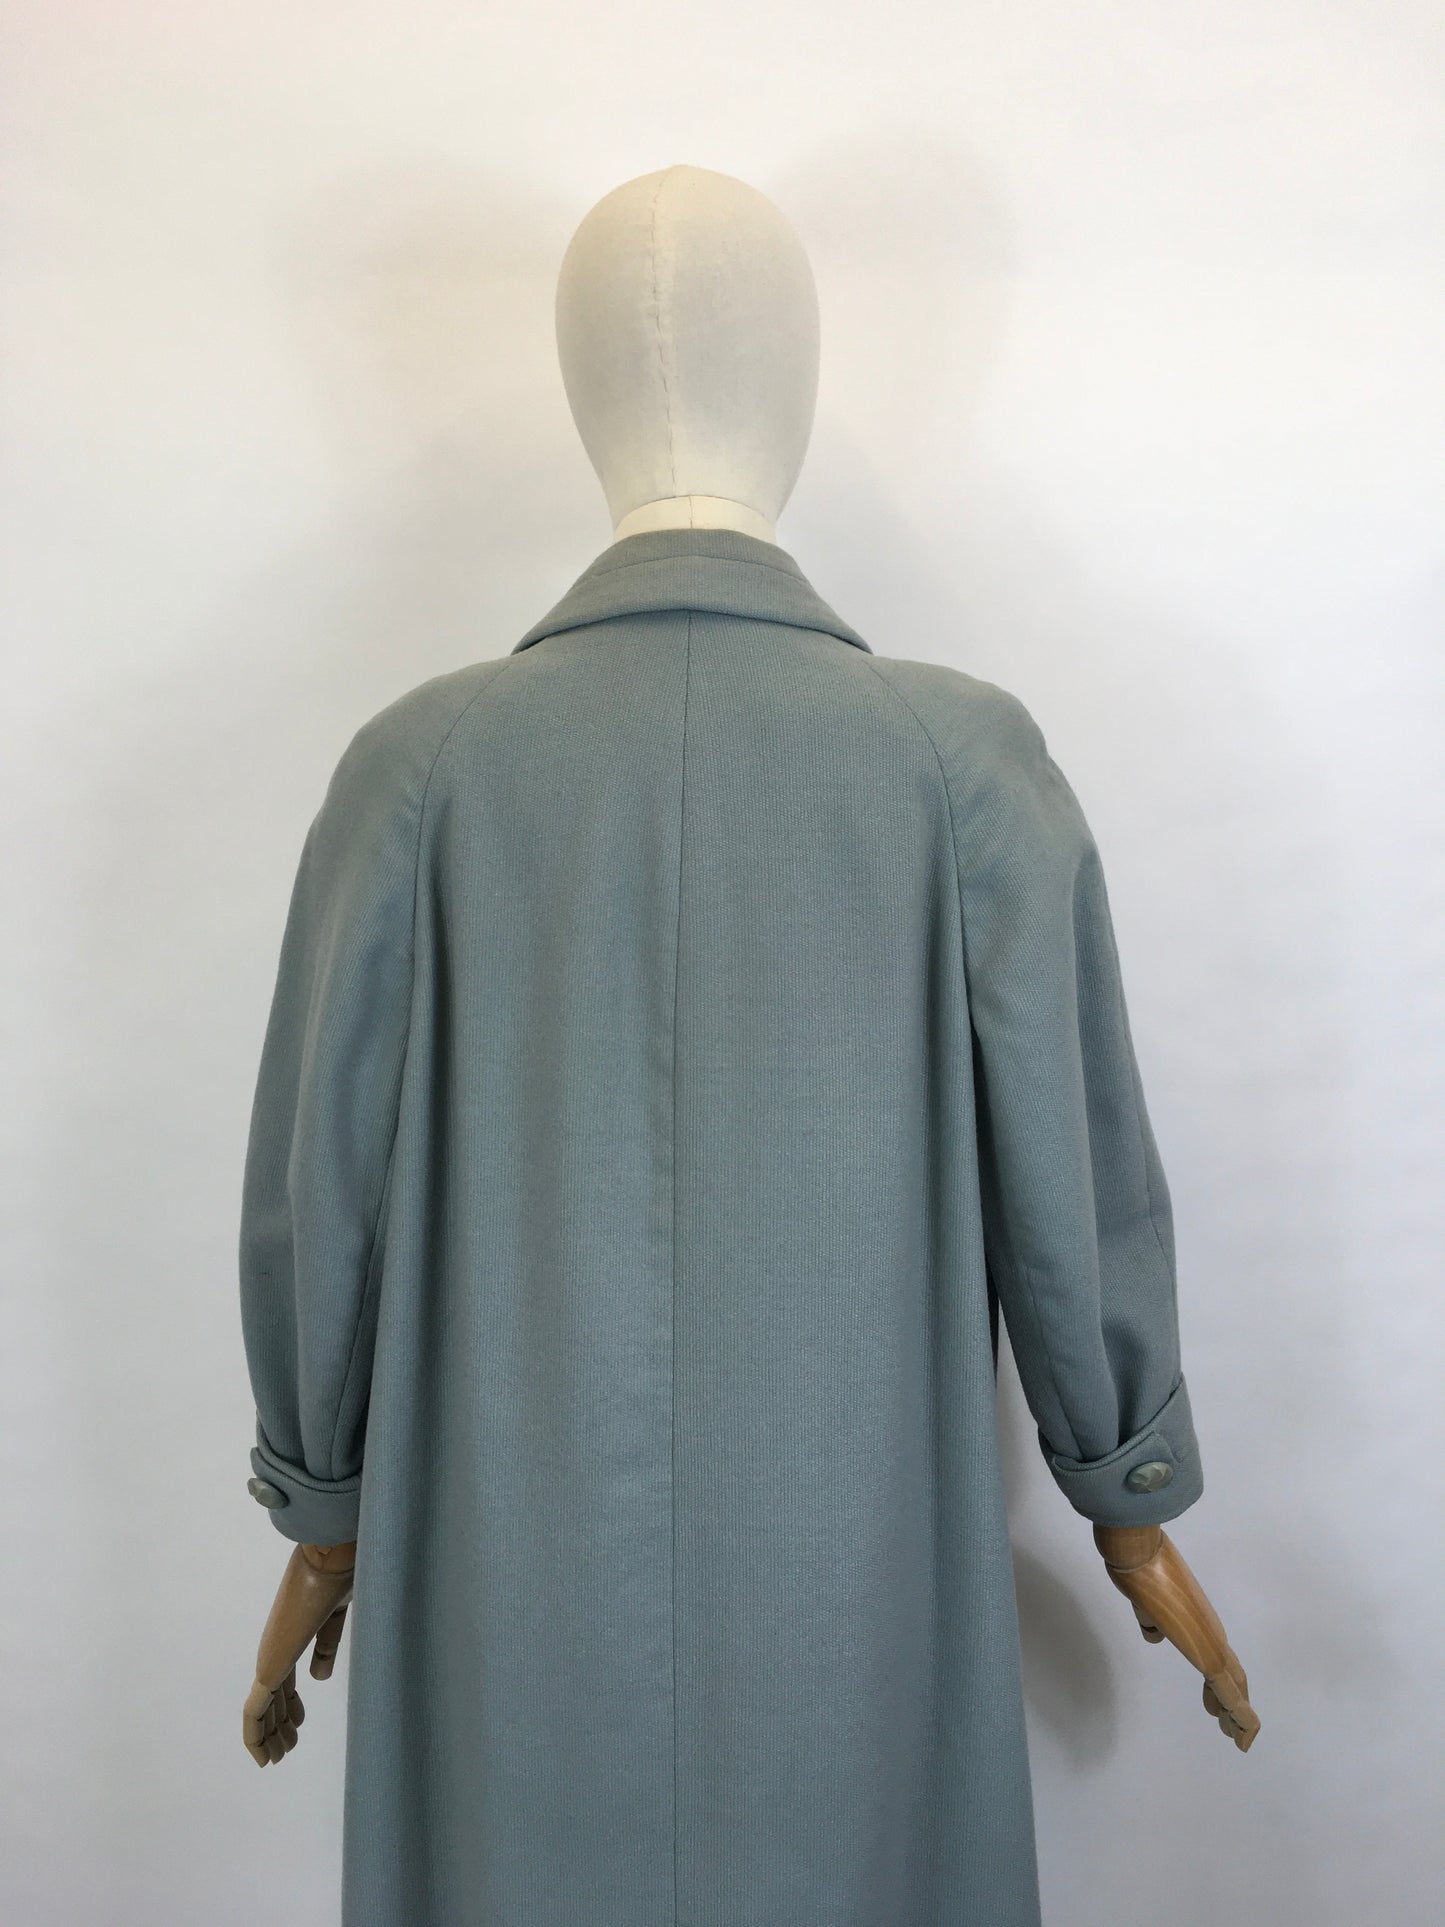 Original 1950’s Darling Pale Blue Swing Coat - With A Classic Easy to Wear 50’s Silhouette